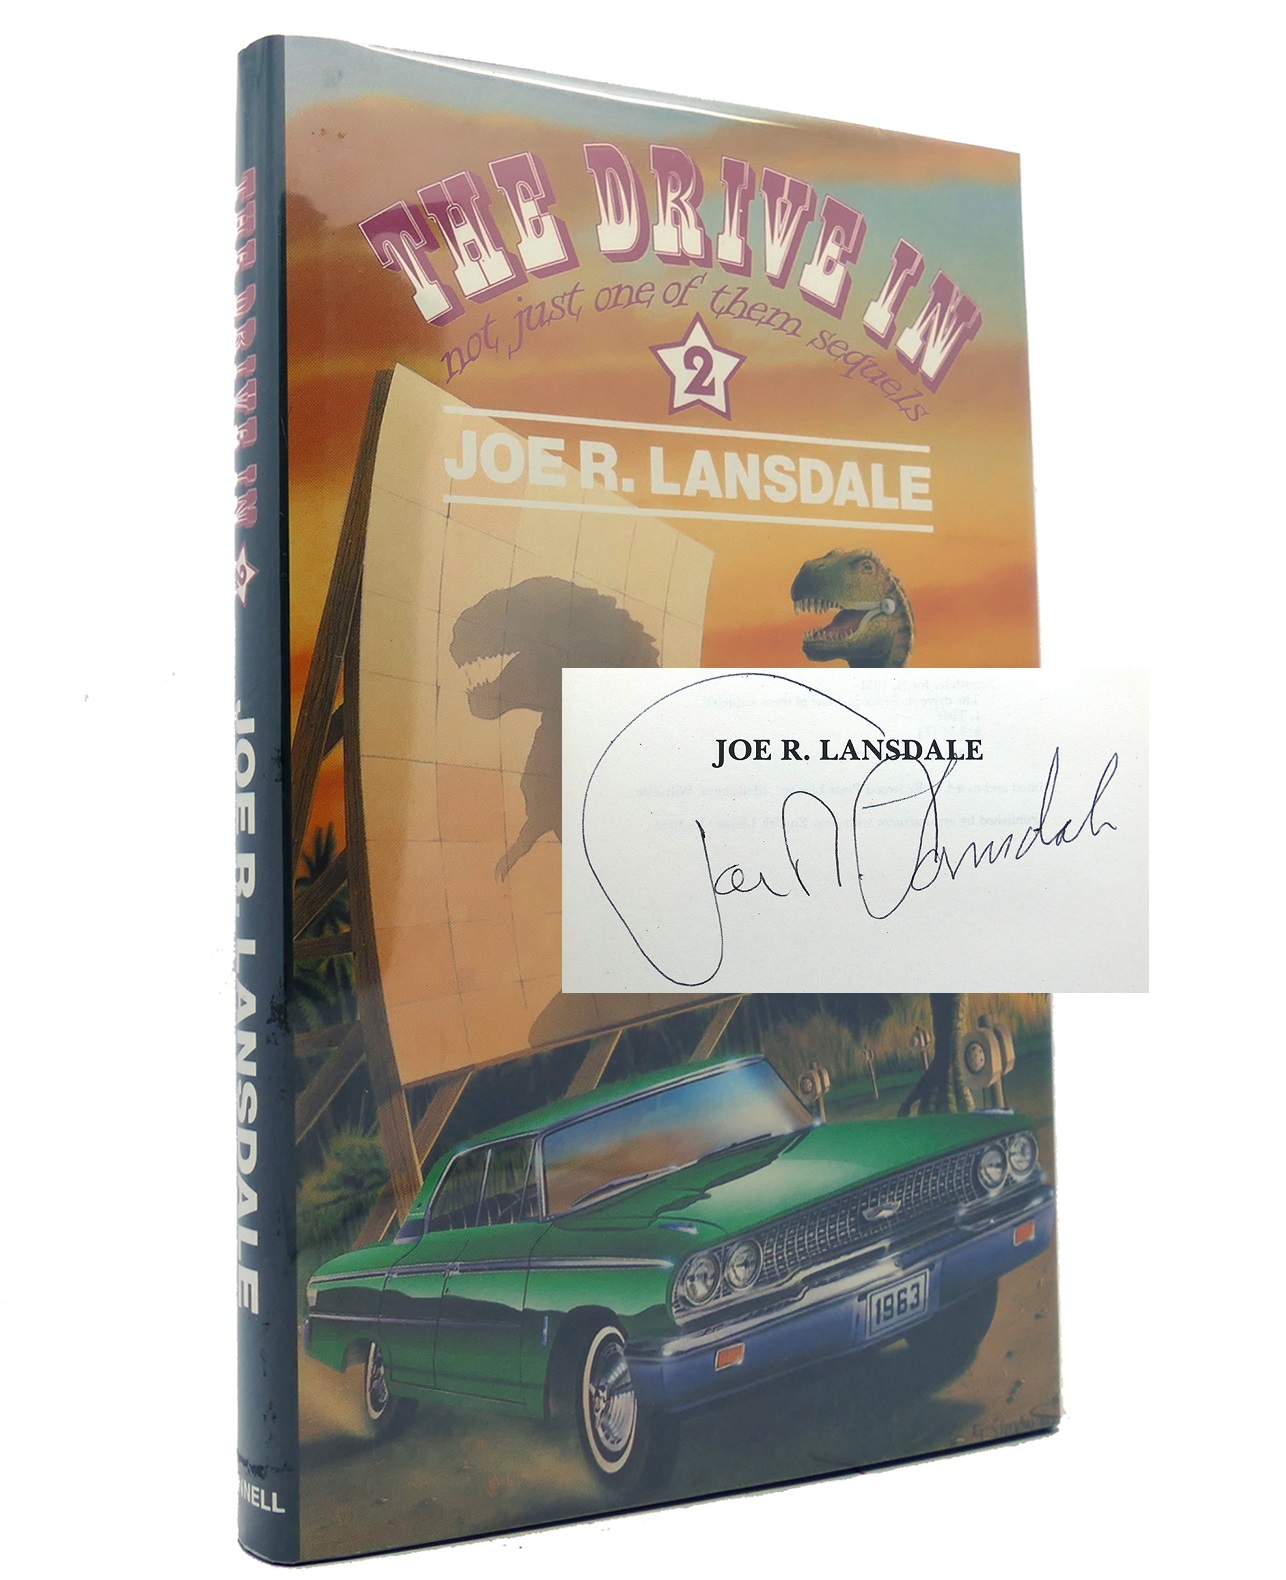 THE DRIVE IN 2 Signed - Joe R. Lansdale